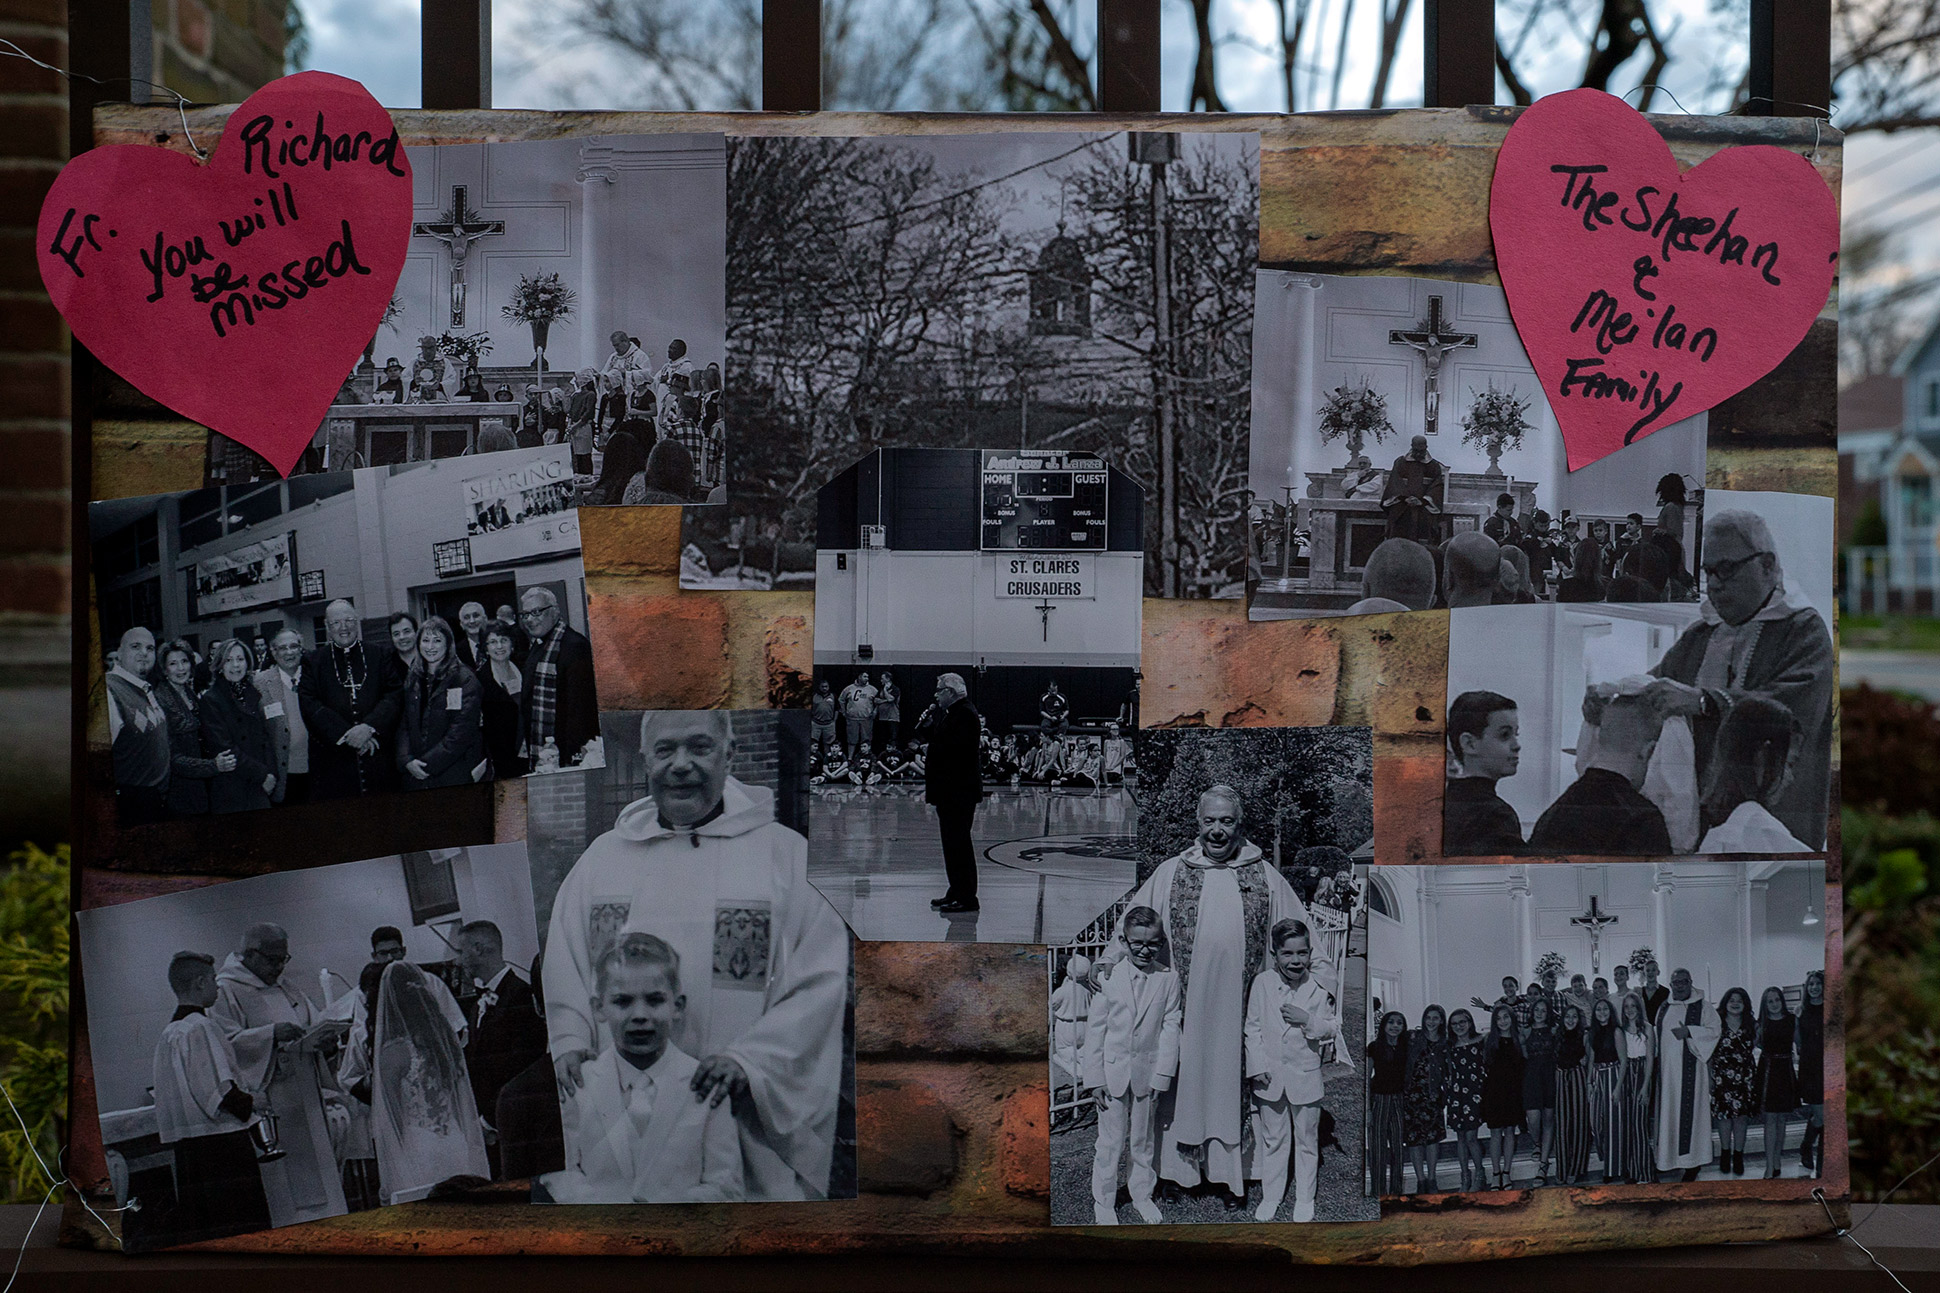 A of collage photographs left at a memorial for Monsignor Richard Guastella, who died from Covid-19 outside the doors of St. Clare Catholic Church in Staten Island, N.Y., on April 10, 2020. (Paul Moakley for TIME)